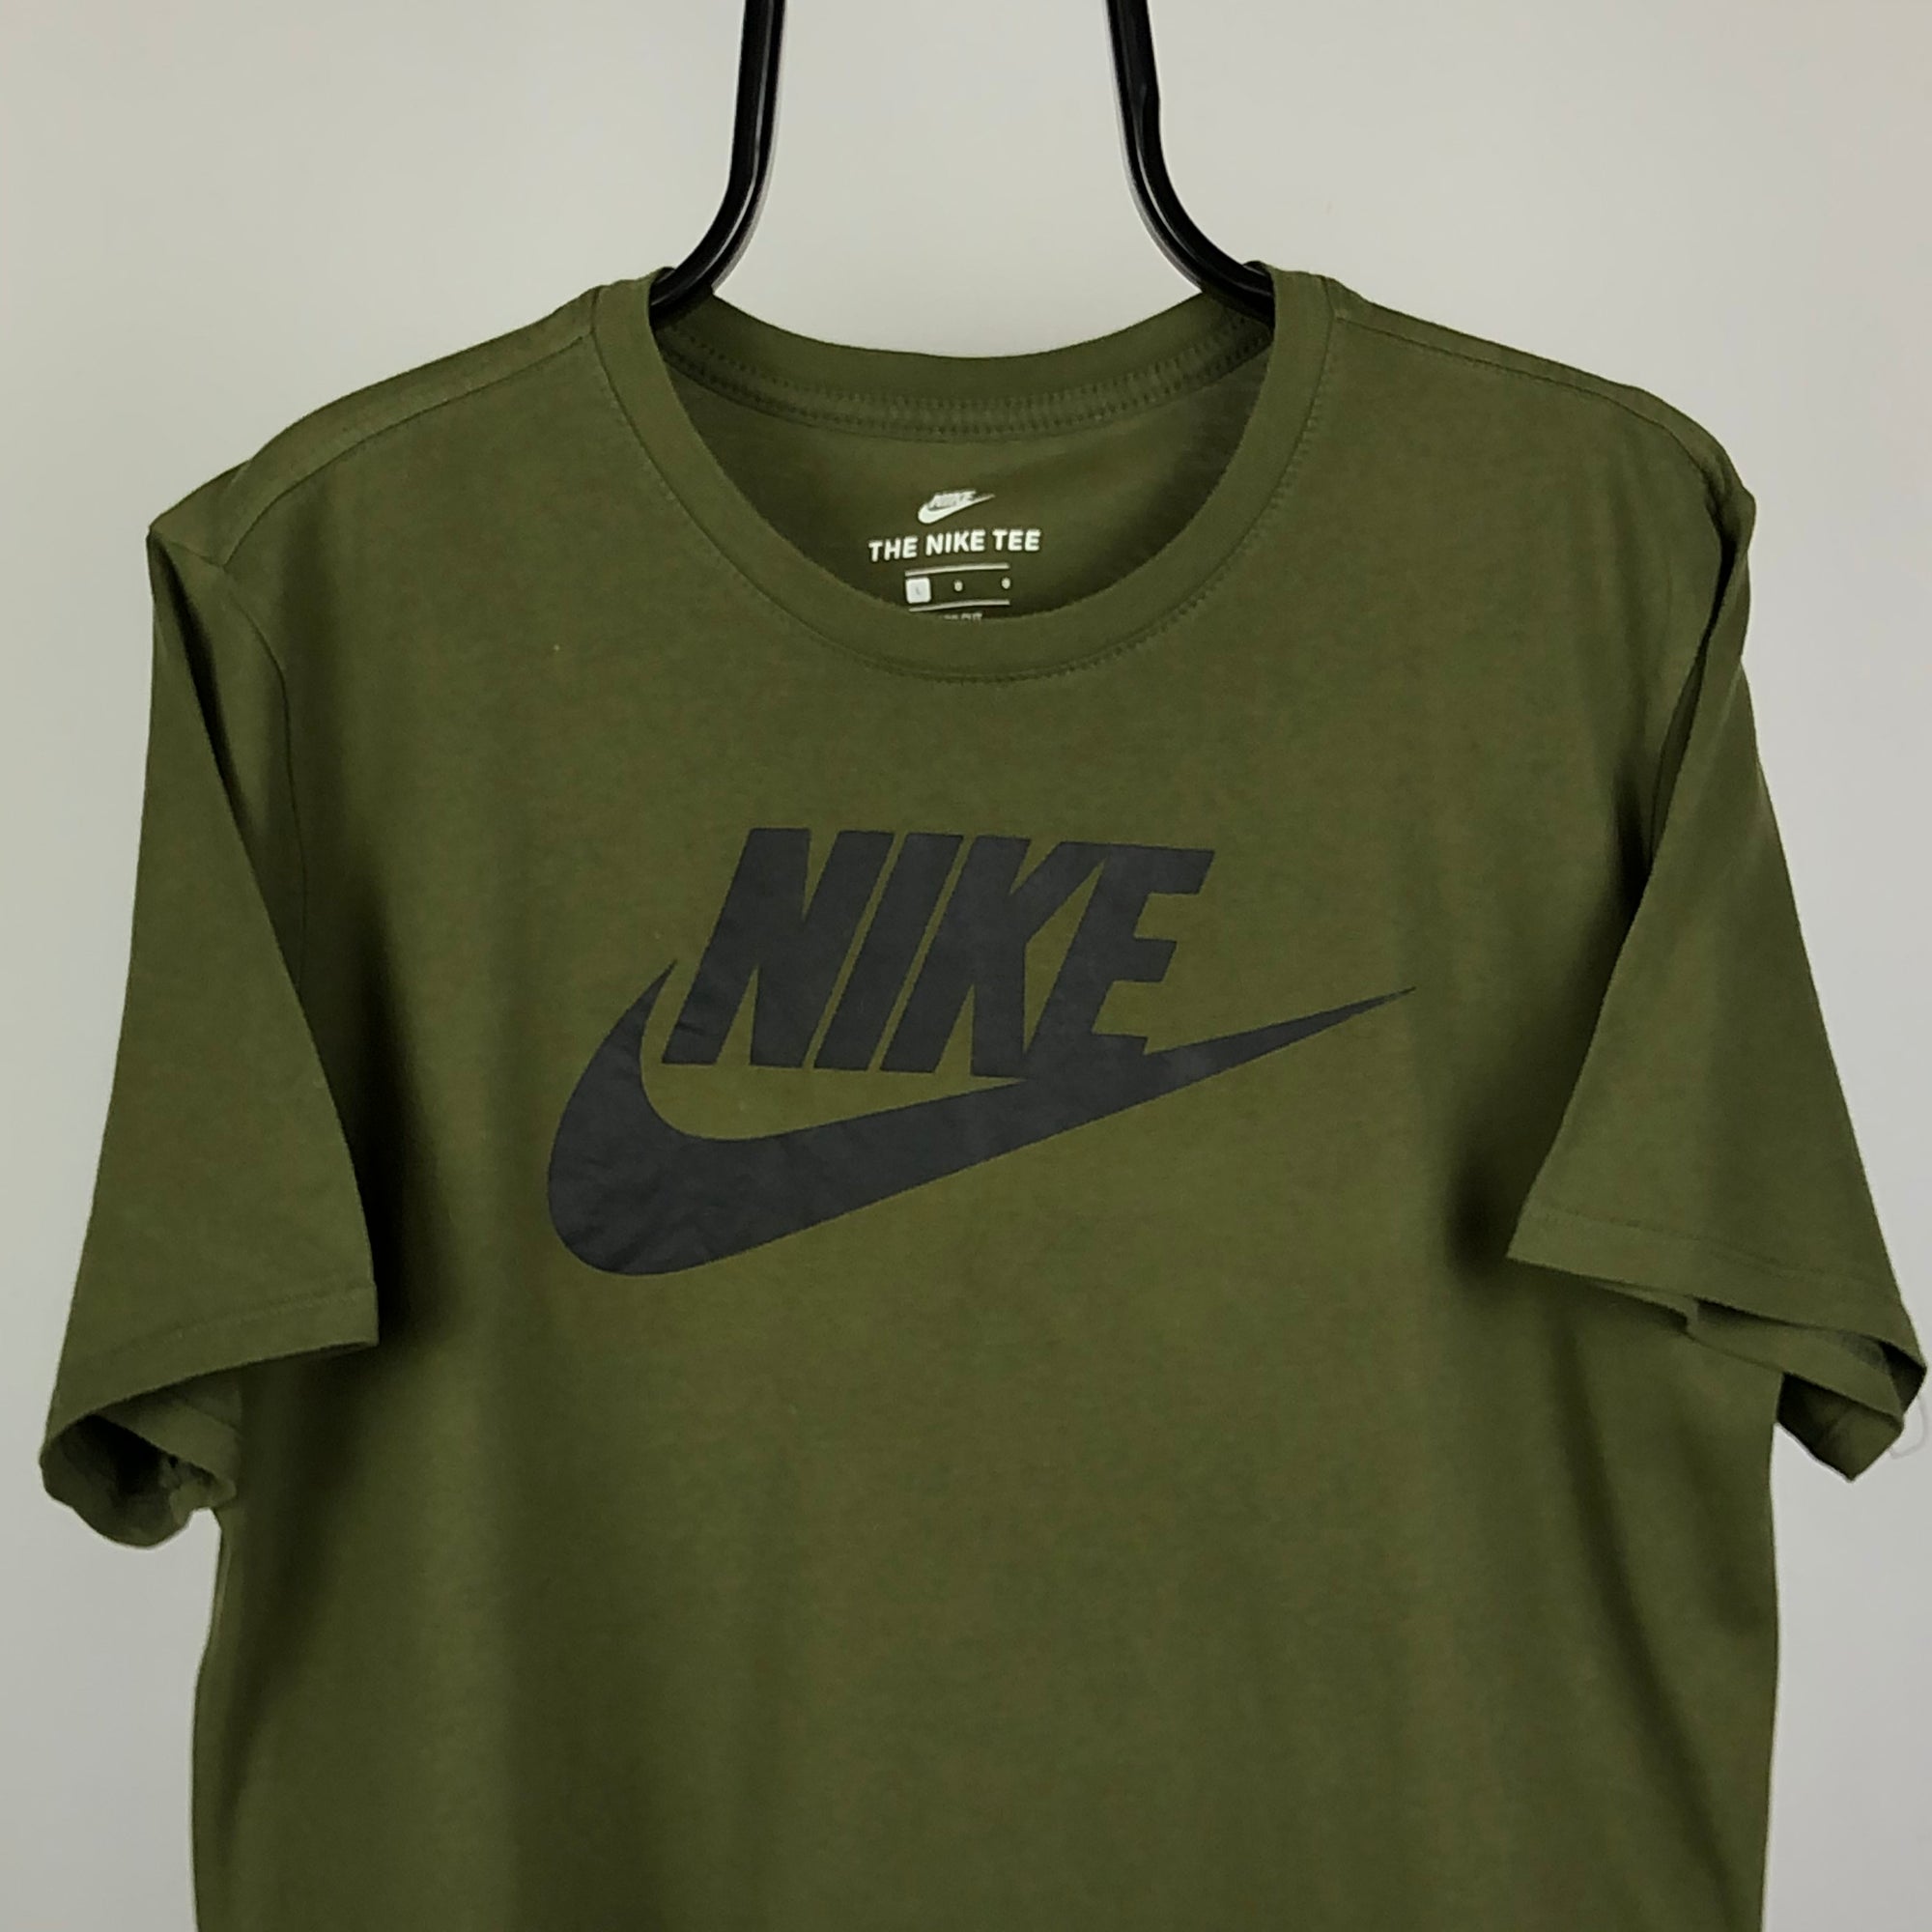 Nike Air Spellout Print Tee in Army Green - Men's Large/Women's XL